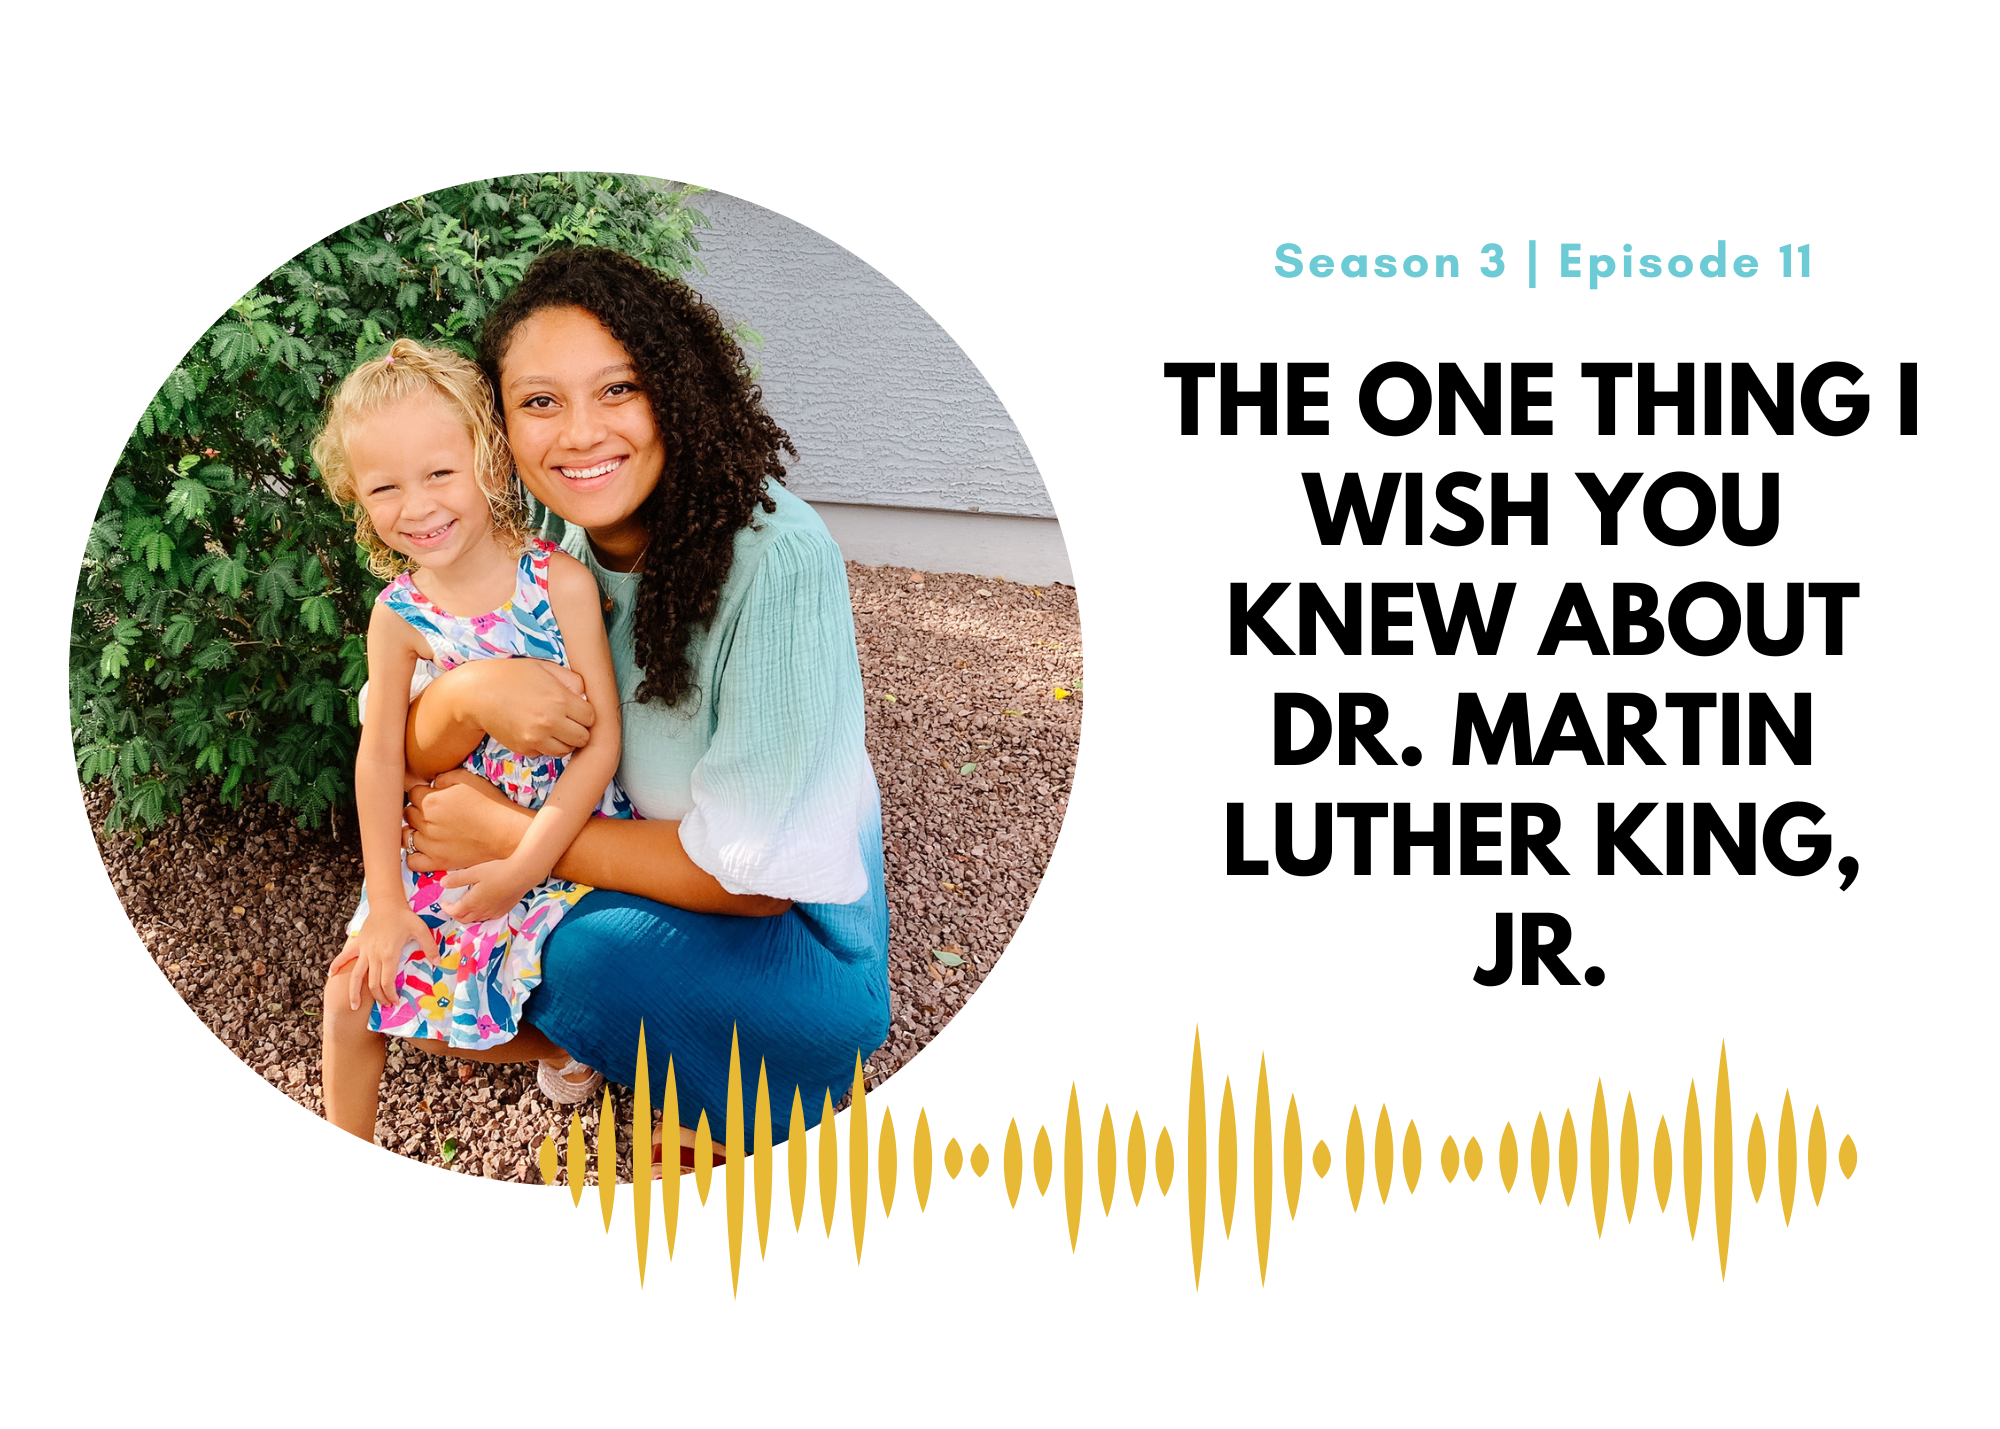 The One Thing I Wish You Knew About Dr. Martin Luther King, Jr.